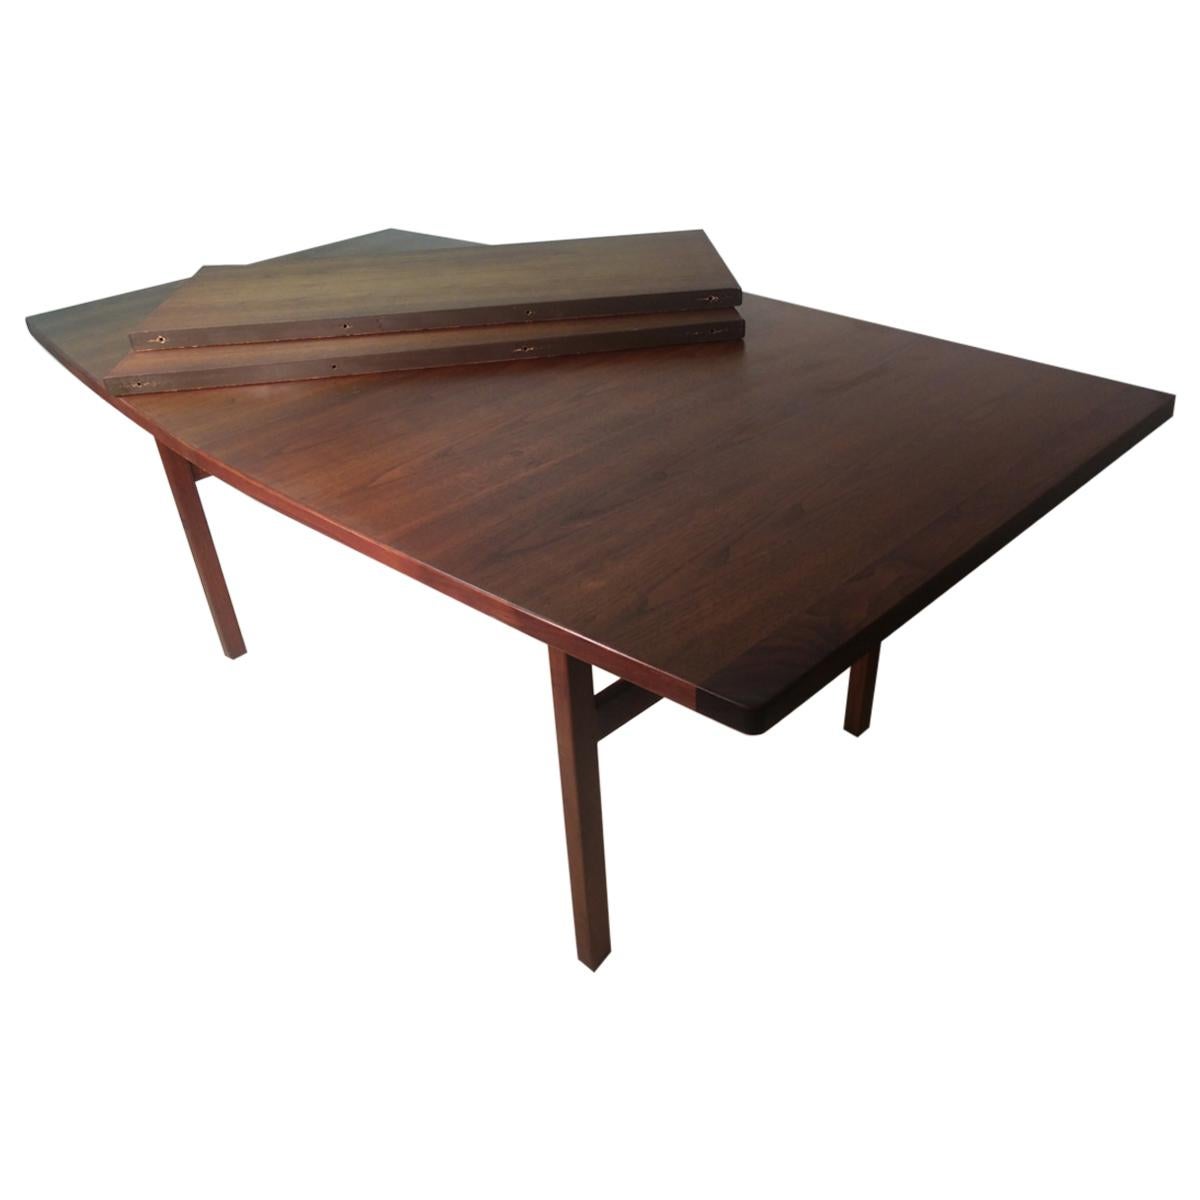 Mid-Century Modern Boat Shaped Walnut Dining Table with 2 Leaves by Jen's Risom